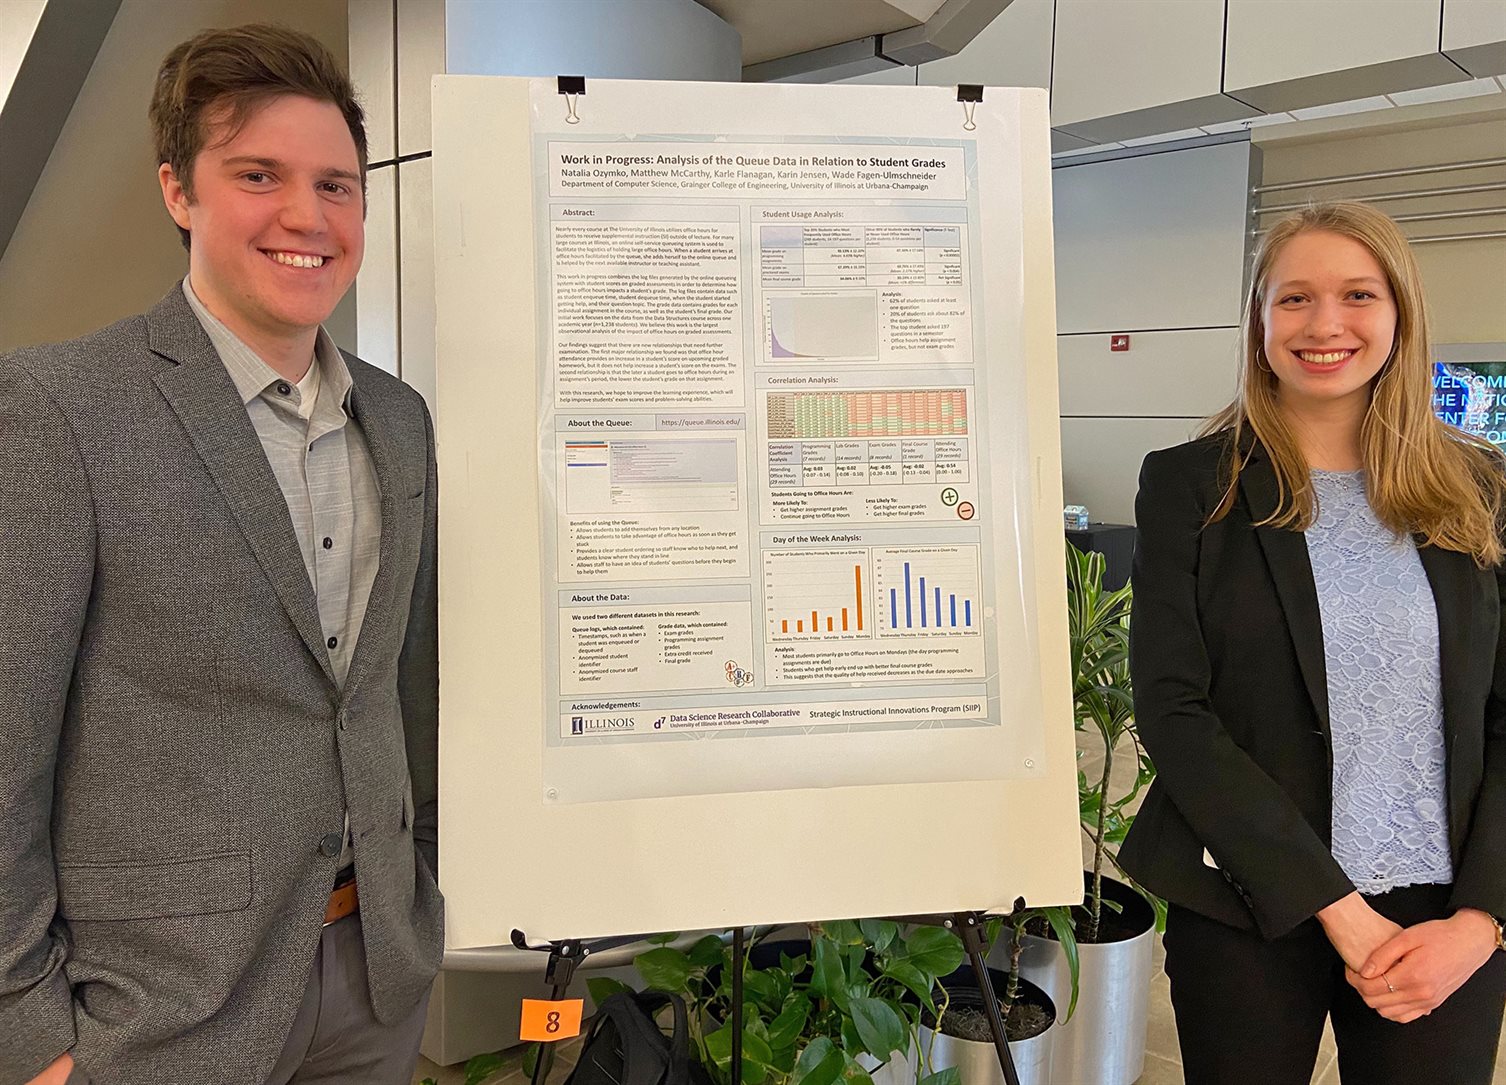 Prior to their June 2020 ASEE conference presentation, CS senior Natalia Ozymko (right) and mathematics student Matthew McCarthy presented the results of their research at an NCSA-hosted poster session on campus.